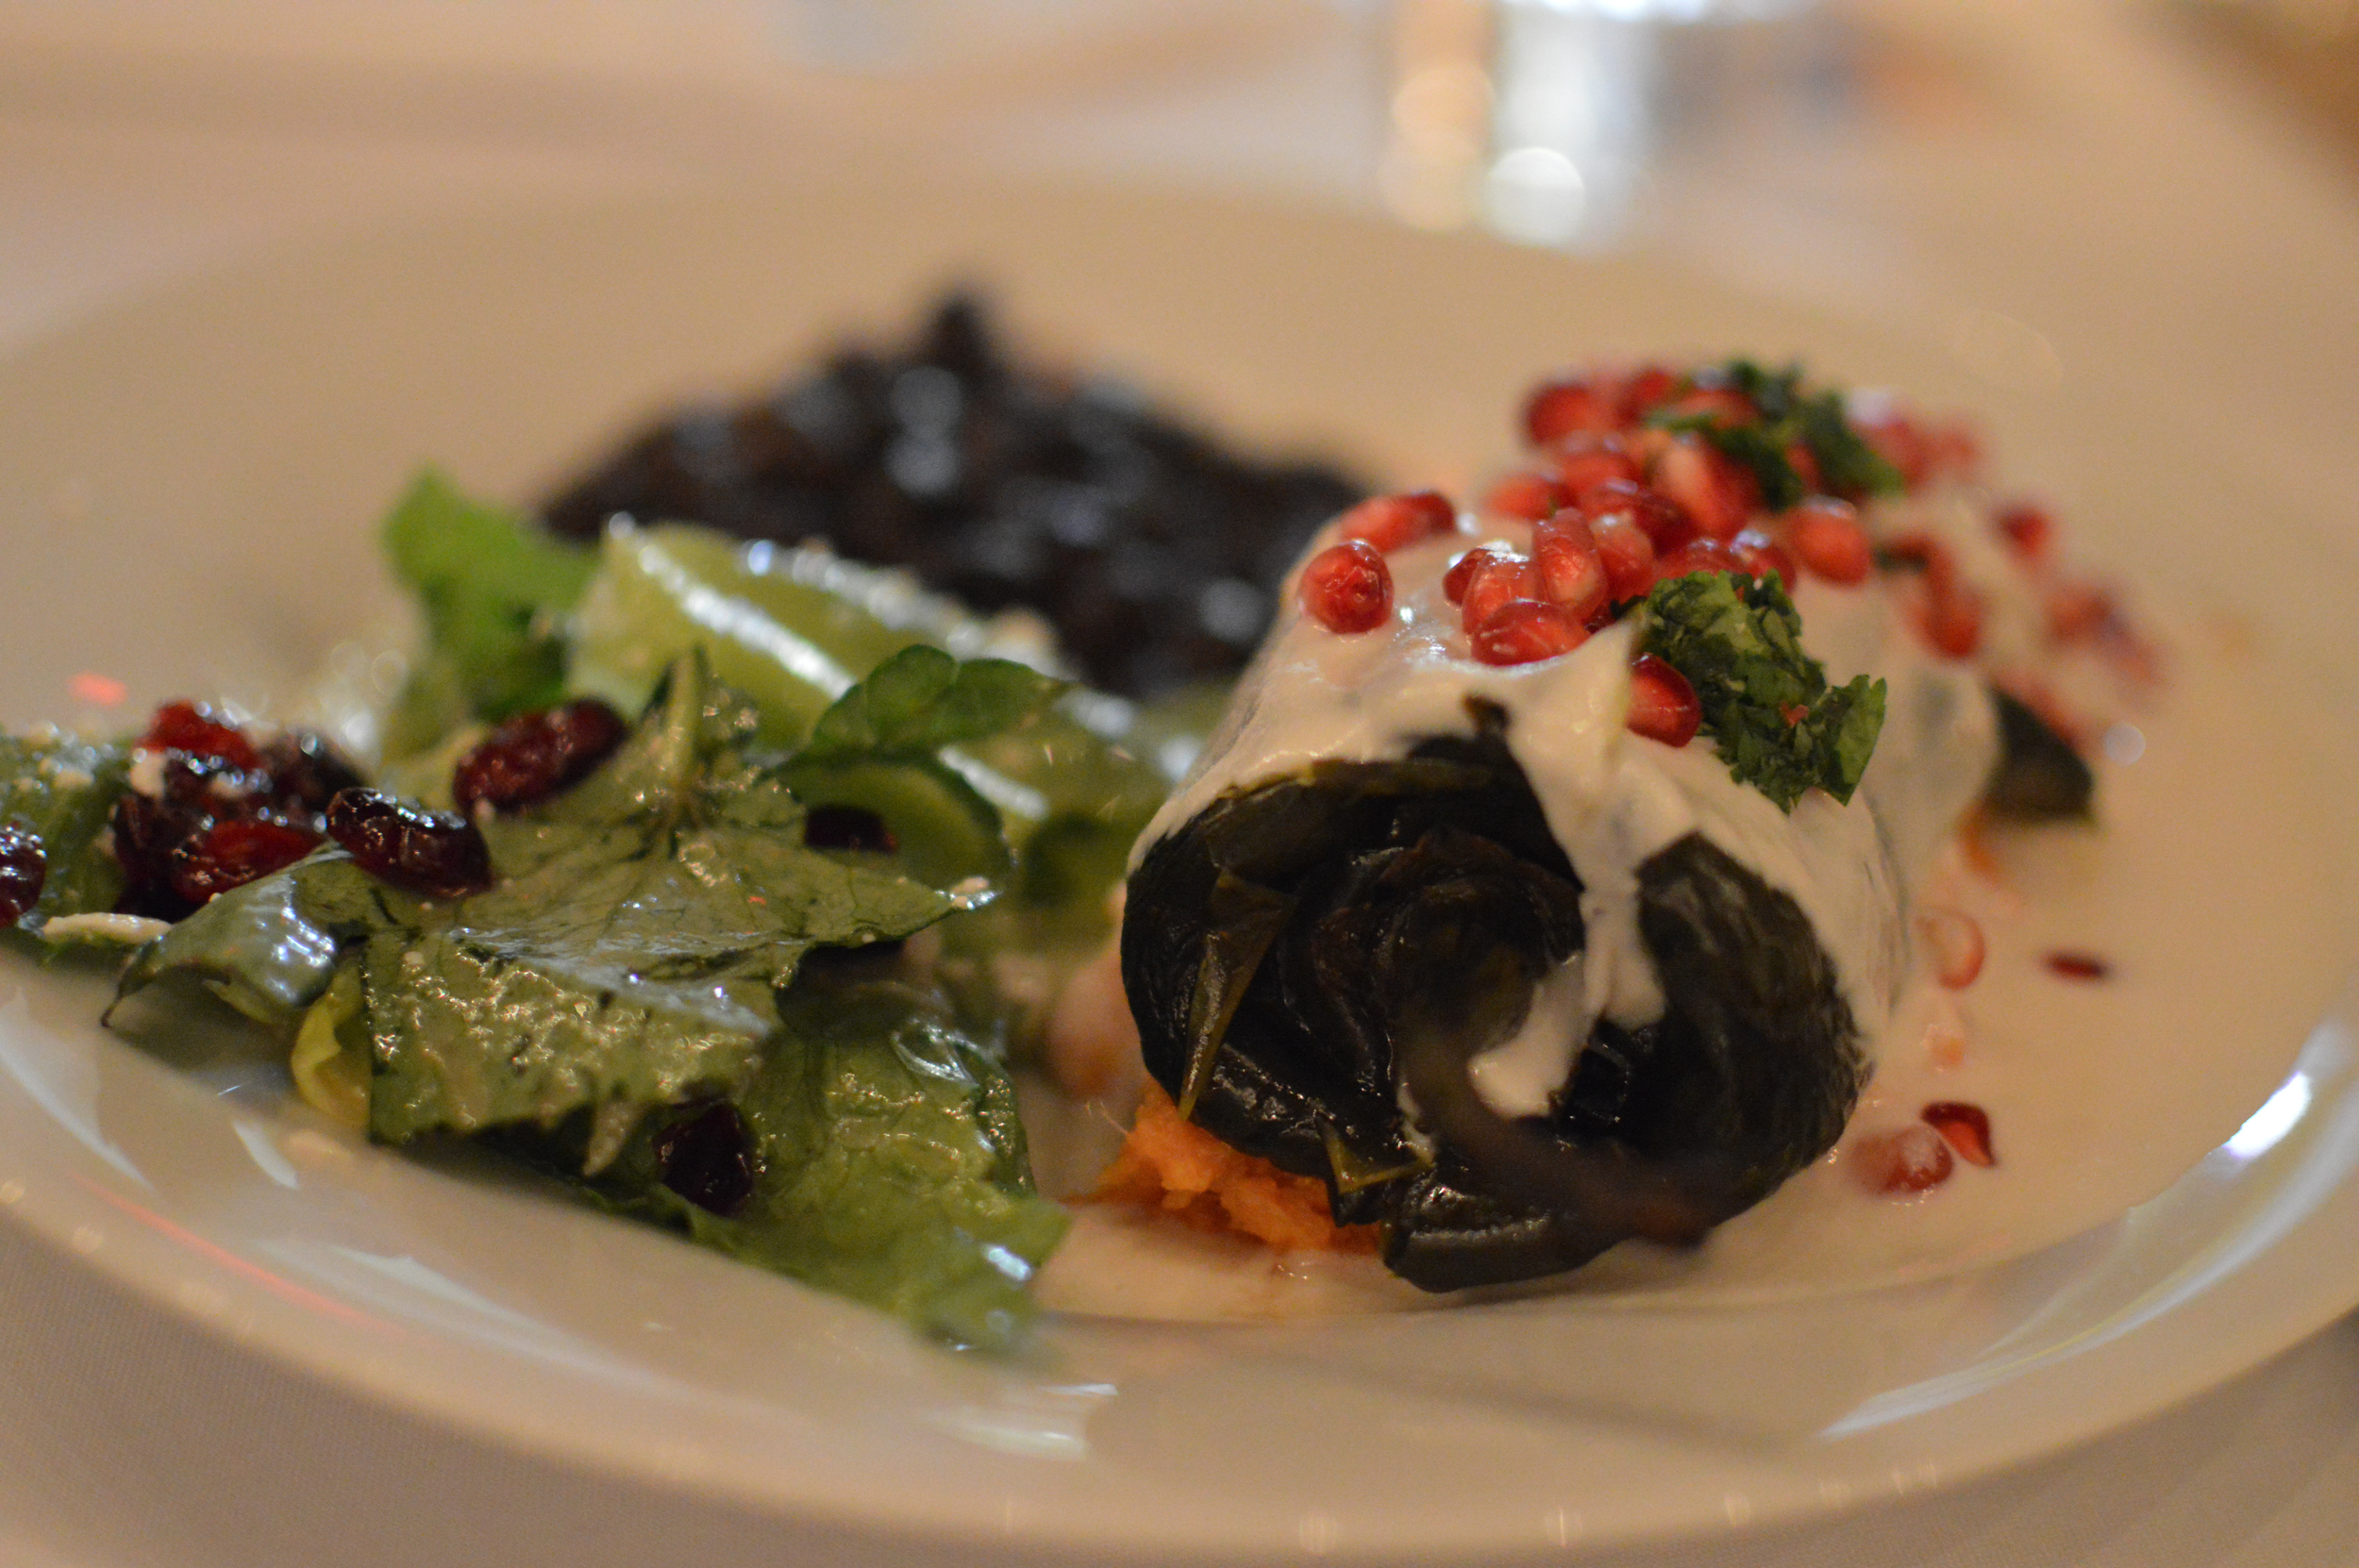 Chile en Nogada, a traditional Mexican dish, served at a wedding